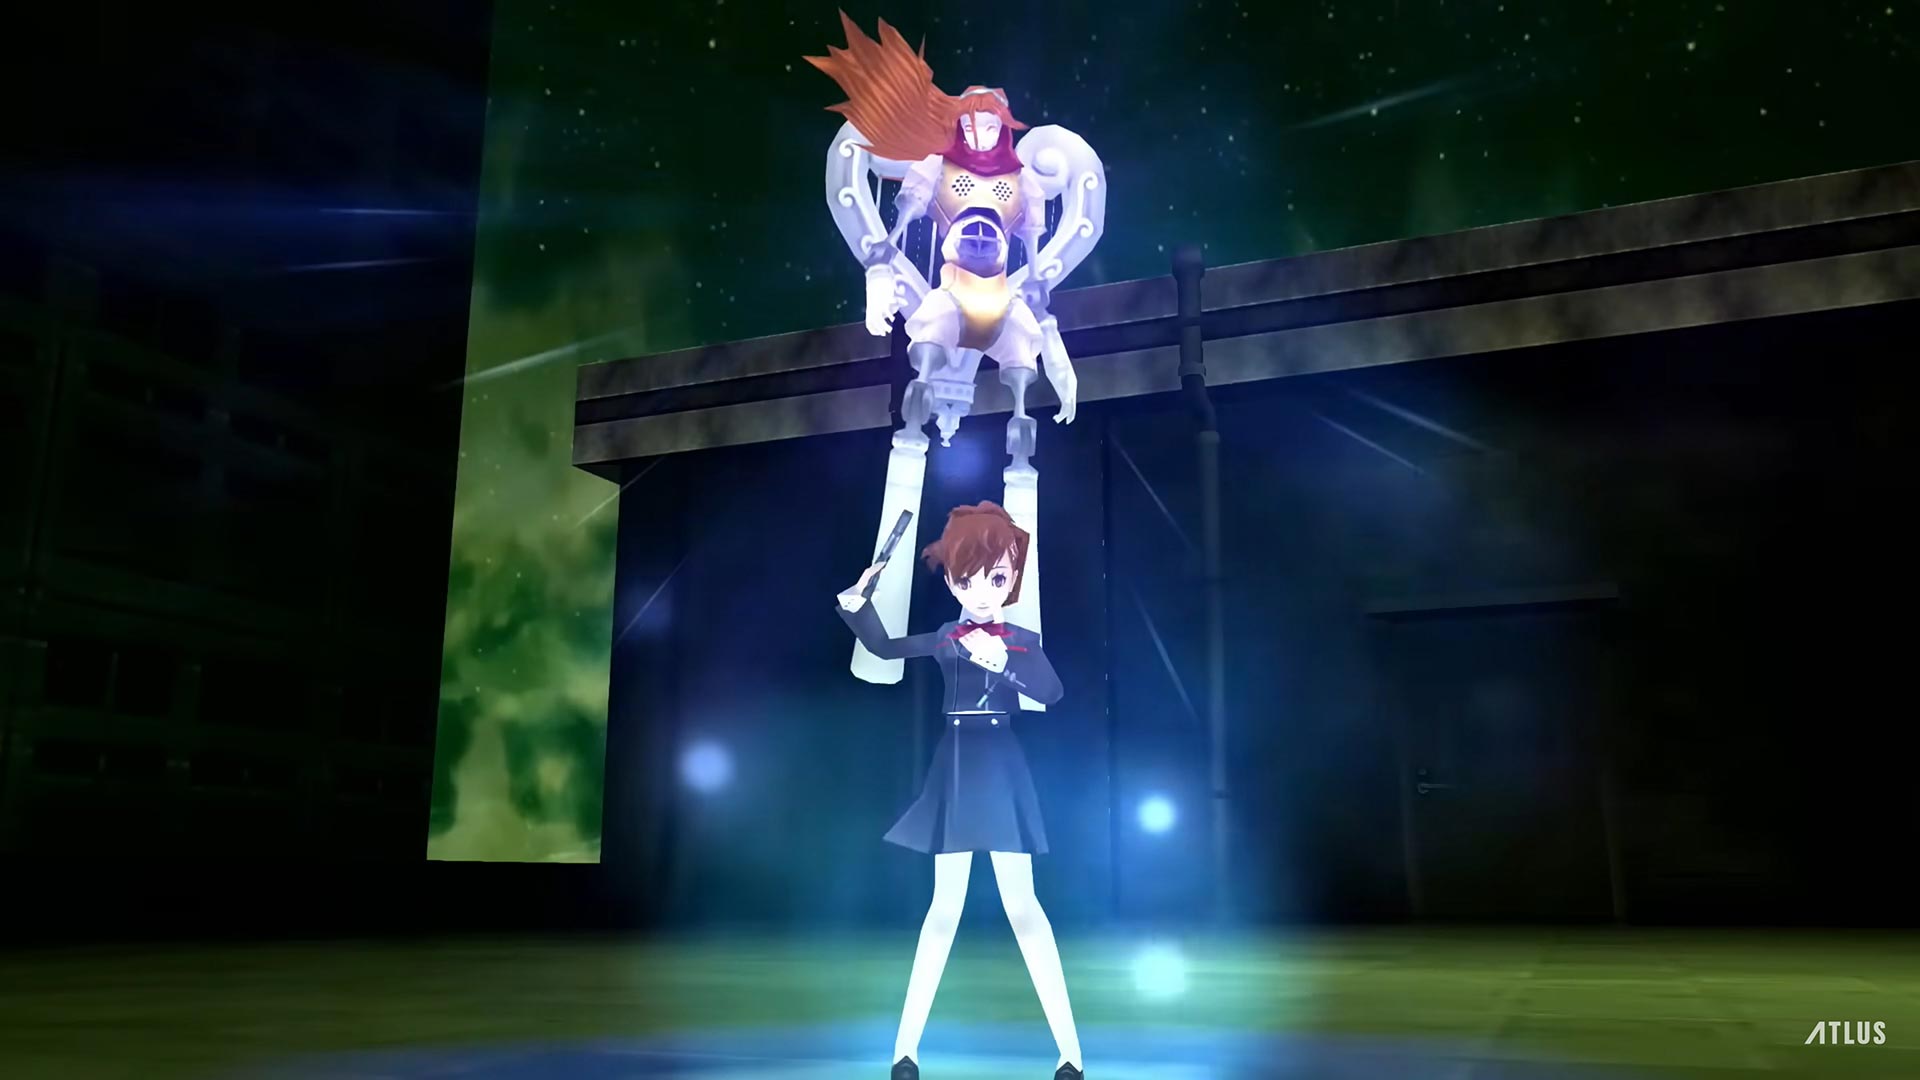 Persona 3 protagonist summoning a monster.